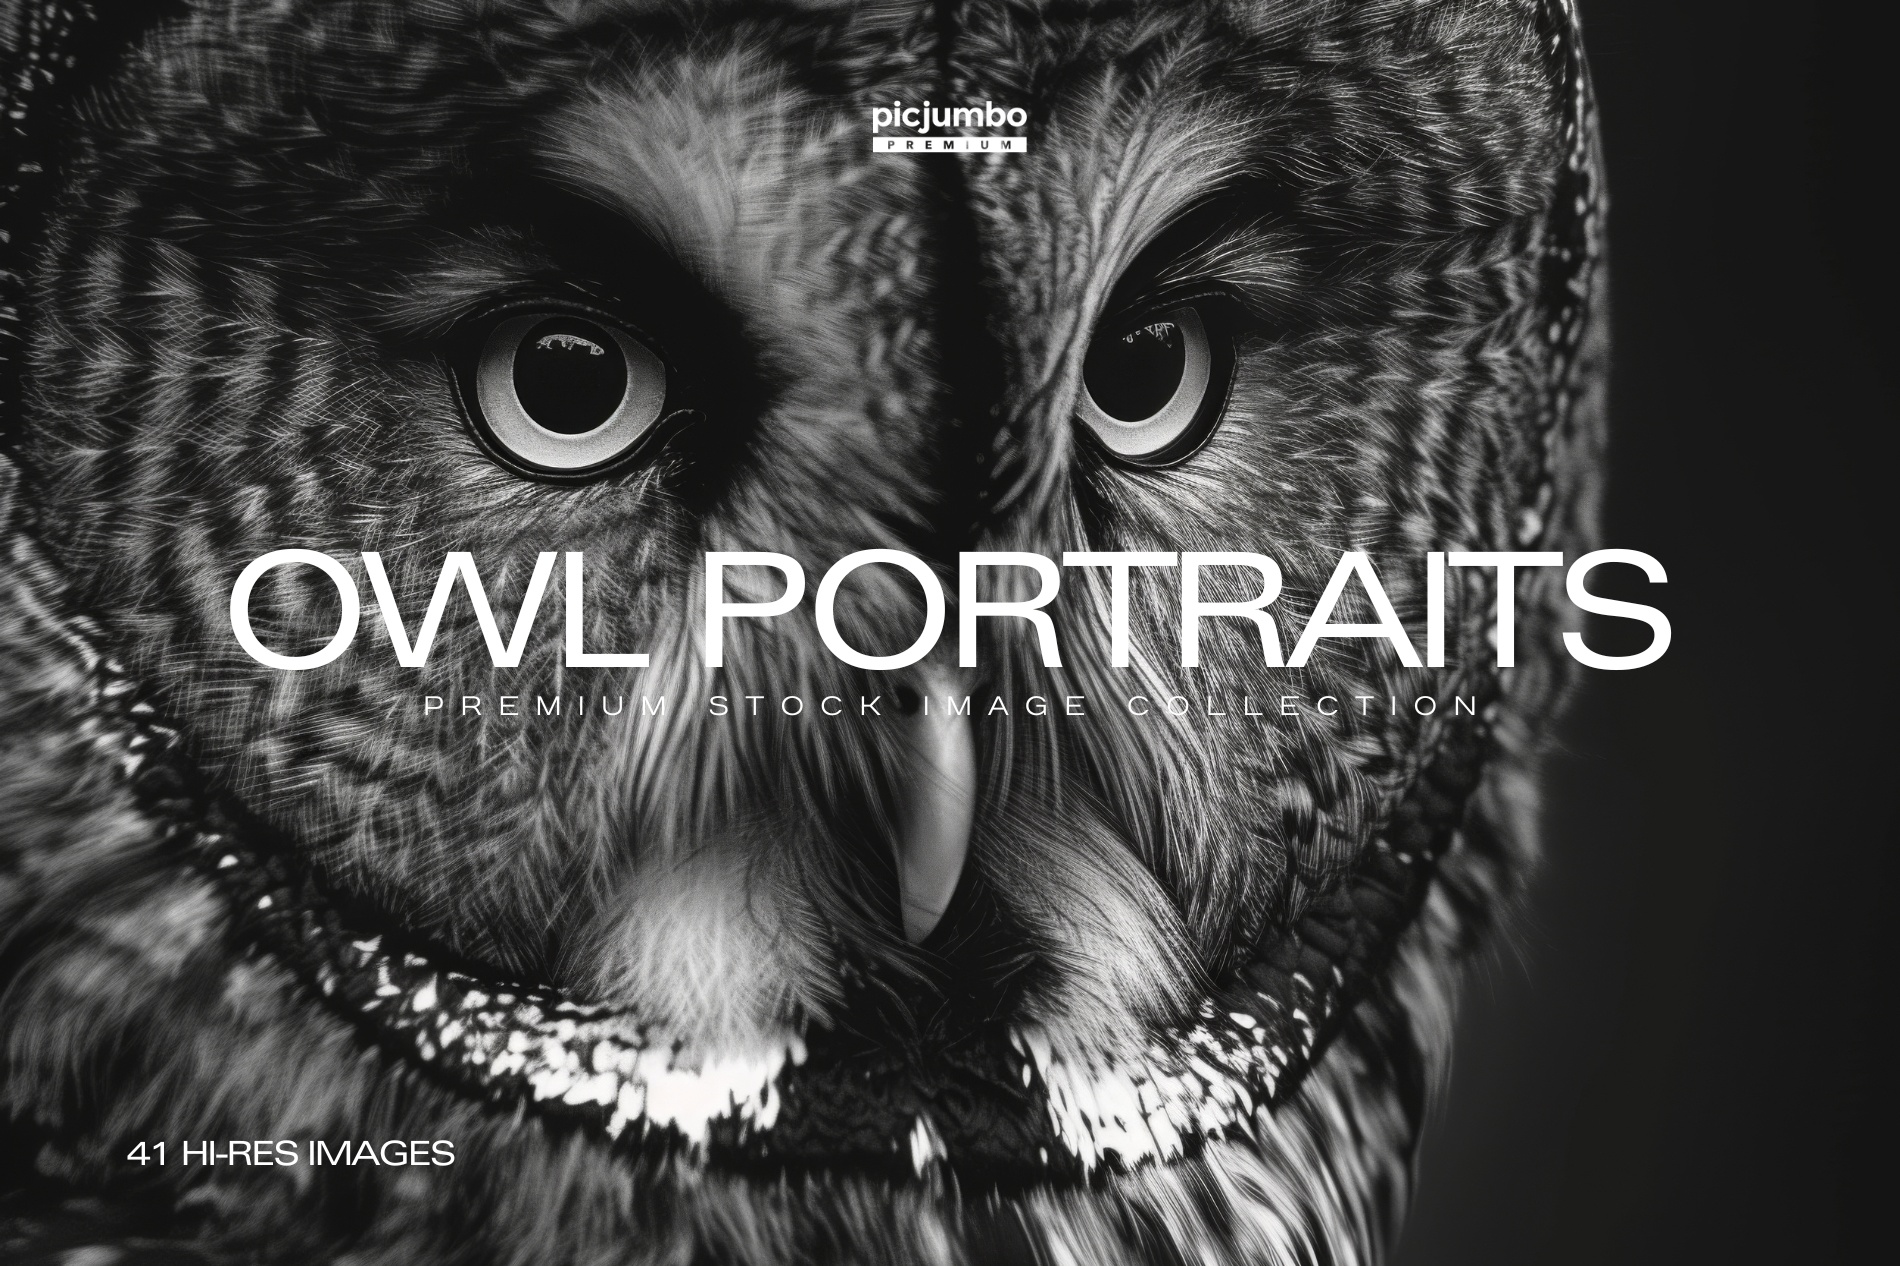 Download hi-res stock photos from our Owl Portraits PREMIUM Collection!